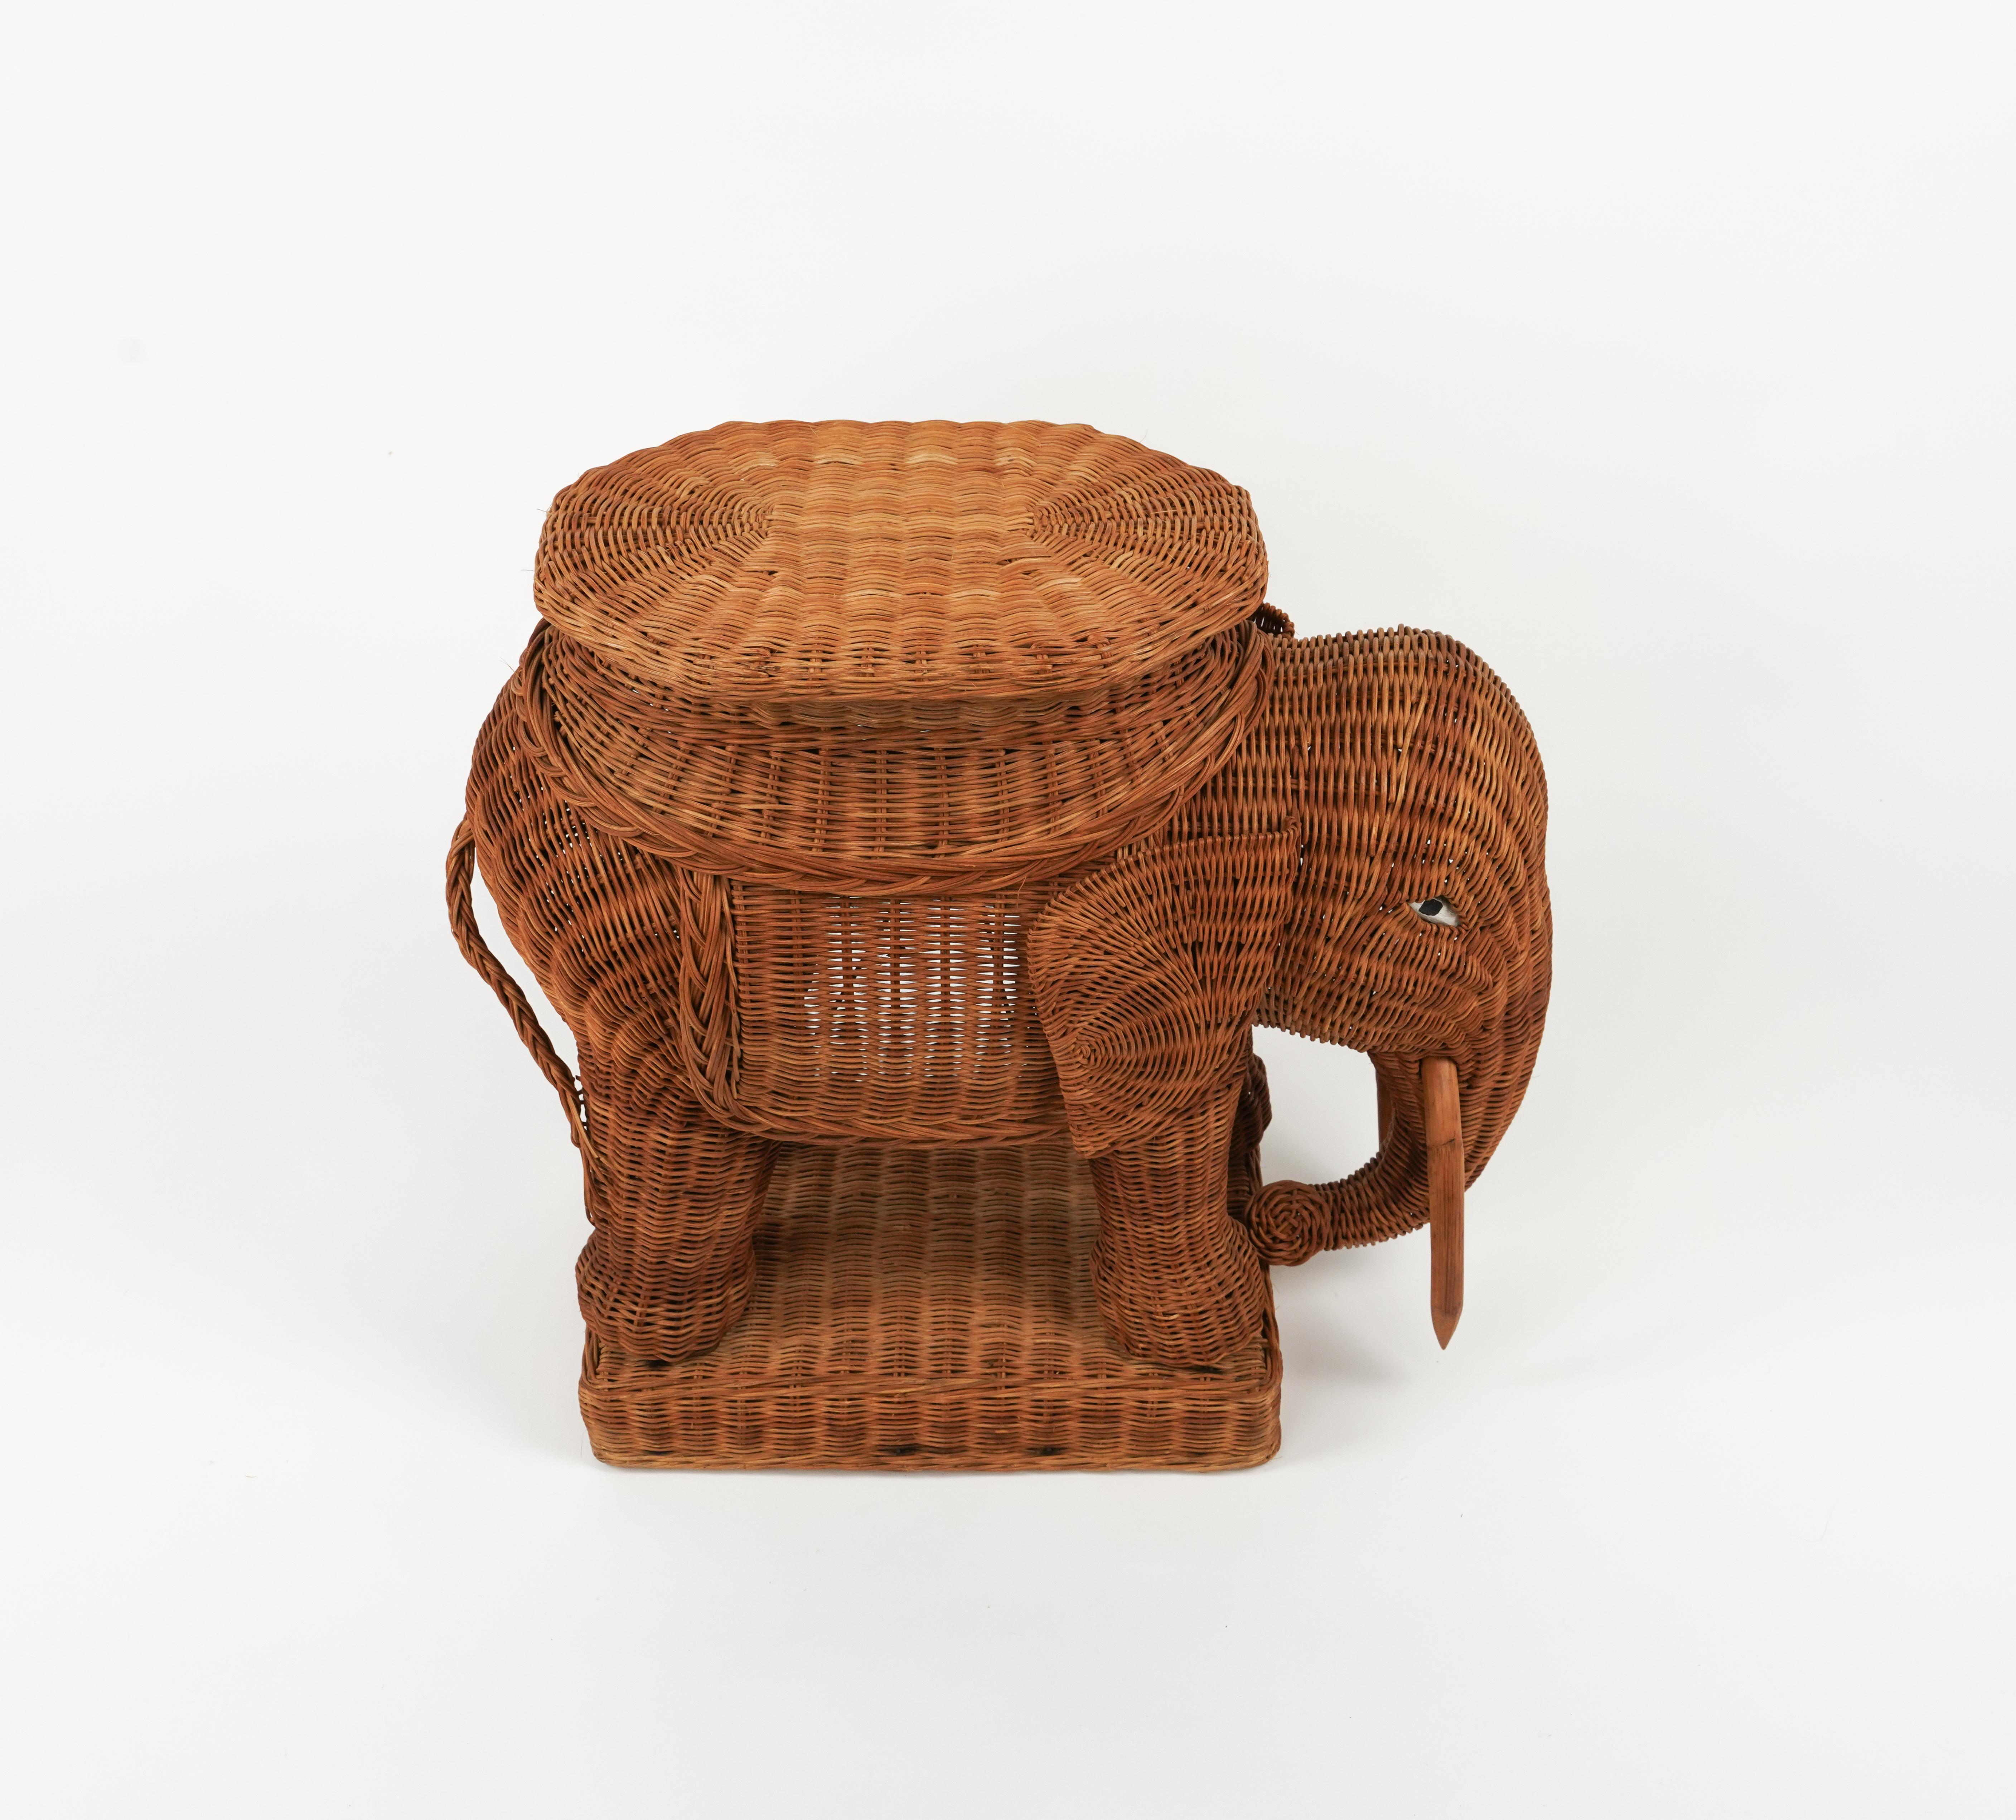 Rattan and Wicker Elephant Side Coffee Table Vivai Del Sud Style, Italy, 1960s For Sale 7